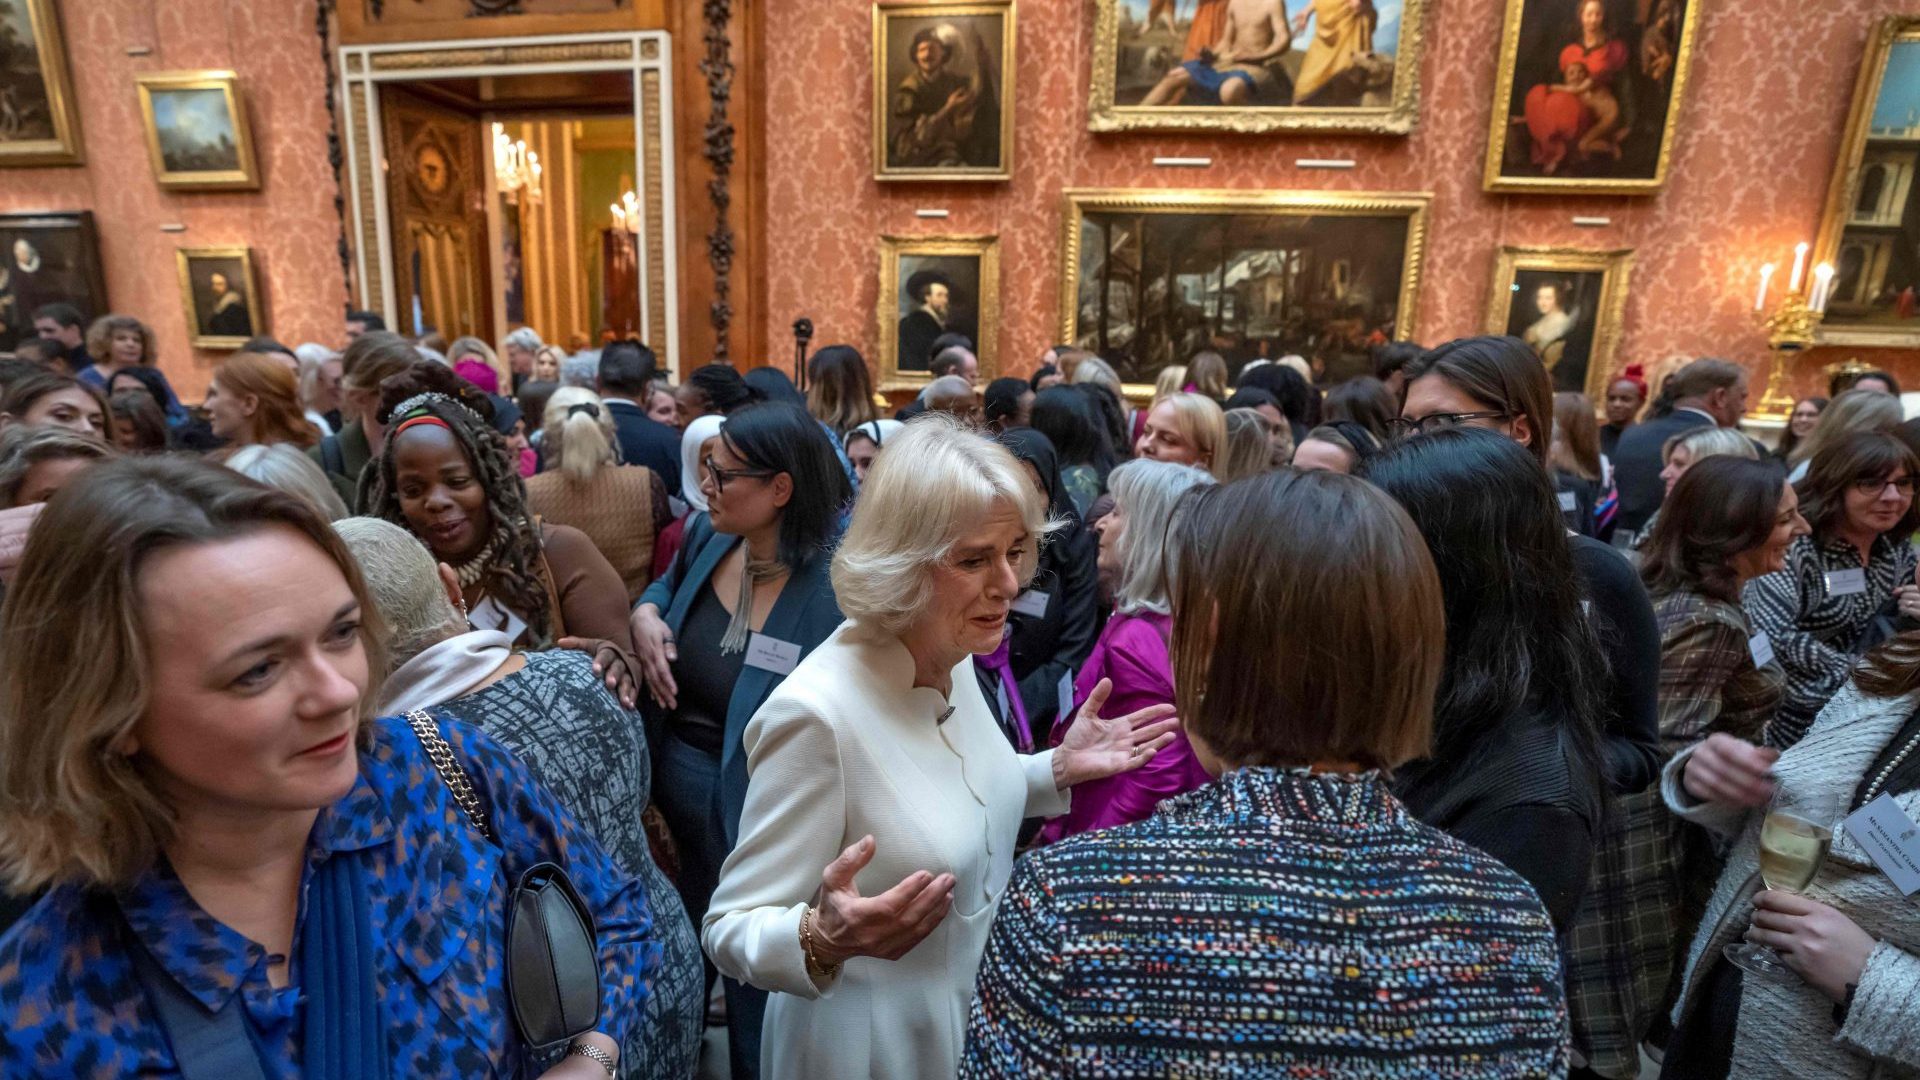 Queen Consort Camilla speaks to guests near Ngozi Fulani at the fateful 
Buckingham Palace 
meeting in November. Photo: Kin Cheung/AFP